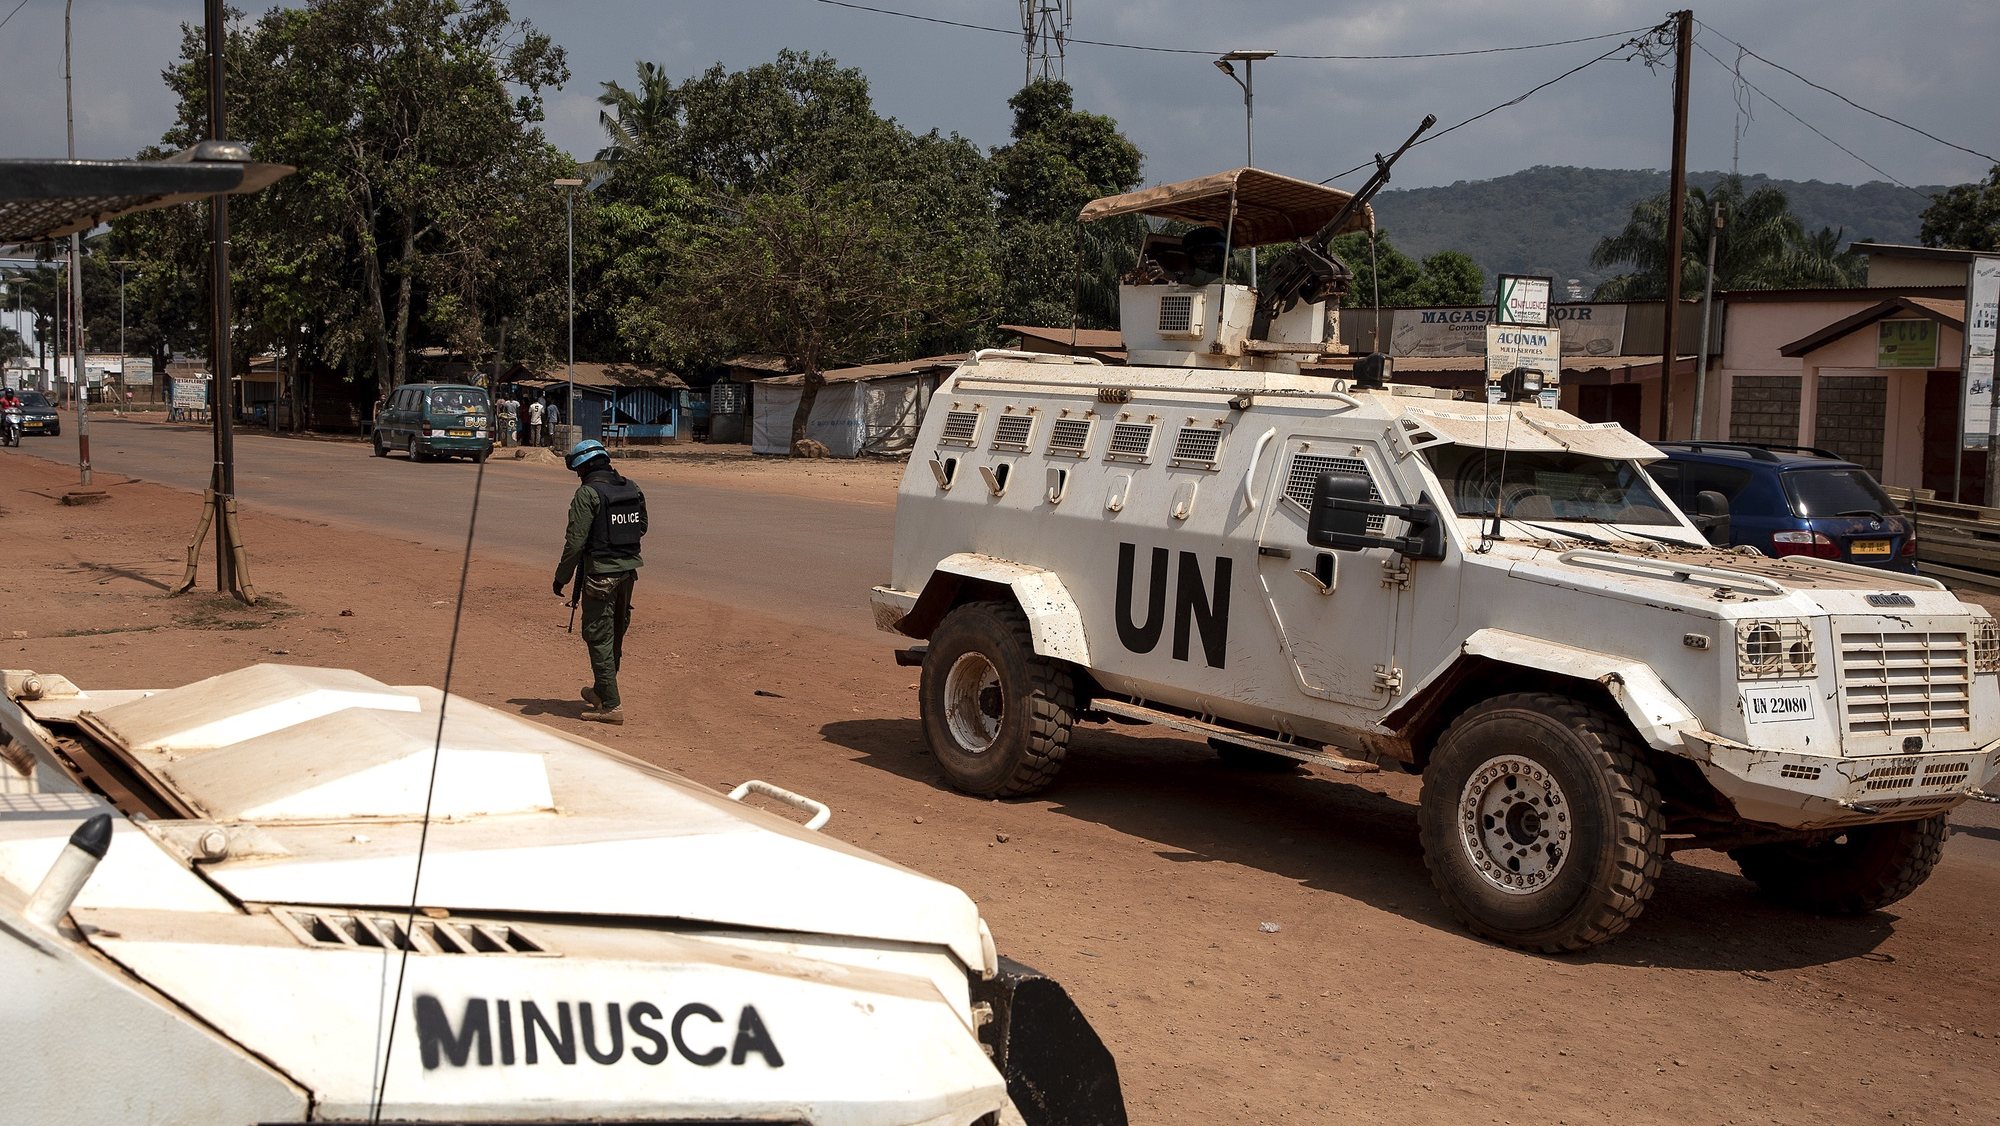 epa08902103 United Nations Multidimensional Integrated Stabilization Mission in the Central African Republic (MINUSCA) patrol in Bangui, Central African Republic (CAR), 23 December 2020. The presidential elections will be held on 27 December 2020 in CAR, one of the world&#039;s poorest and most volatile countries. Tensions are high in the capital Bangui days before the elections with rebel groups trying to prevent the holding of the elections on one side and the CAR army with support from Russia and Rwanda, who have sent hundreds of additional troops to assist the government.  EPA/ADRIENNE SURPRENANT